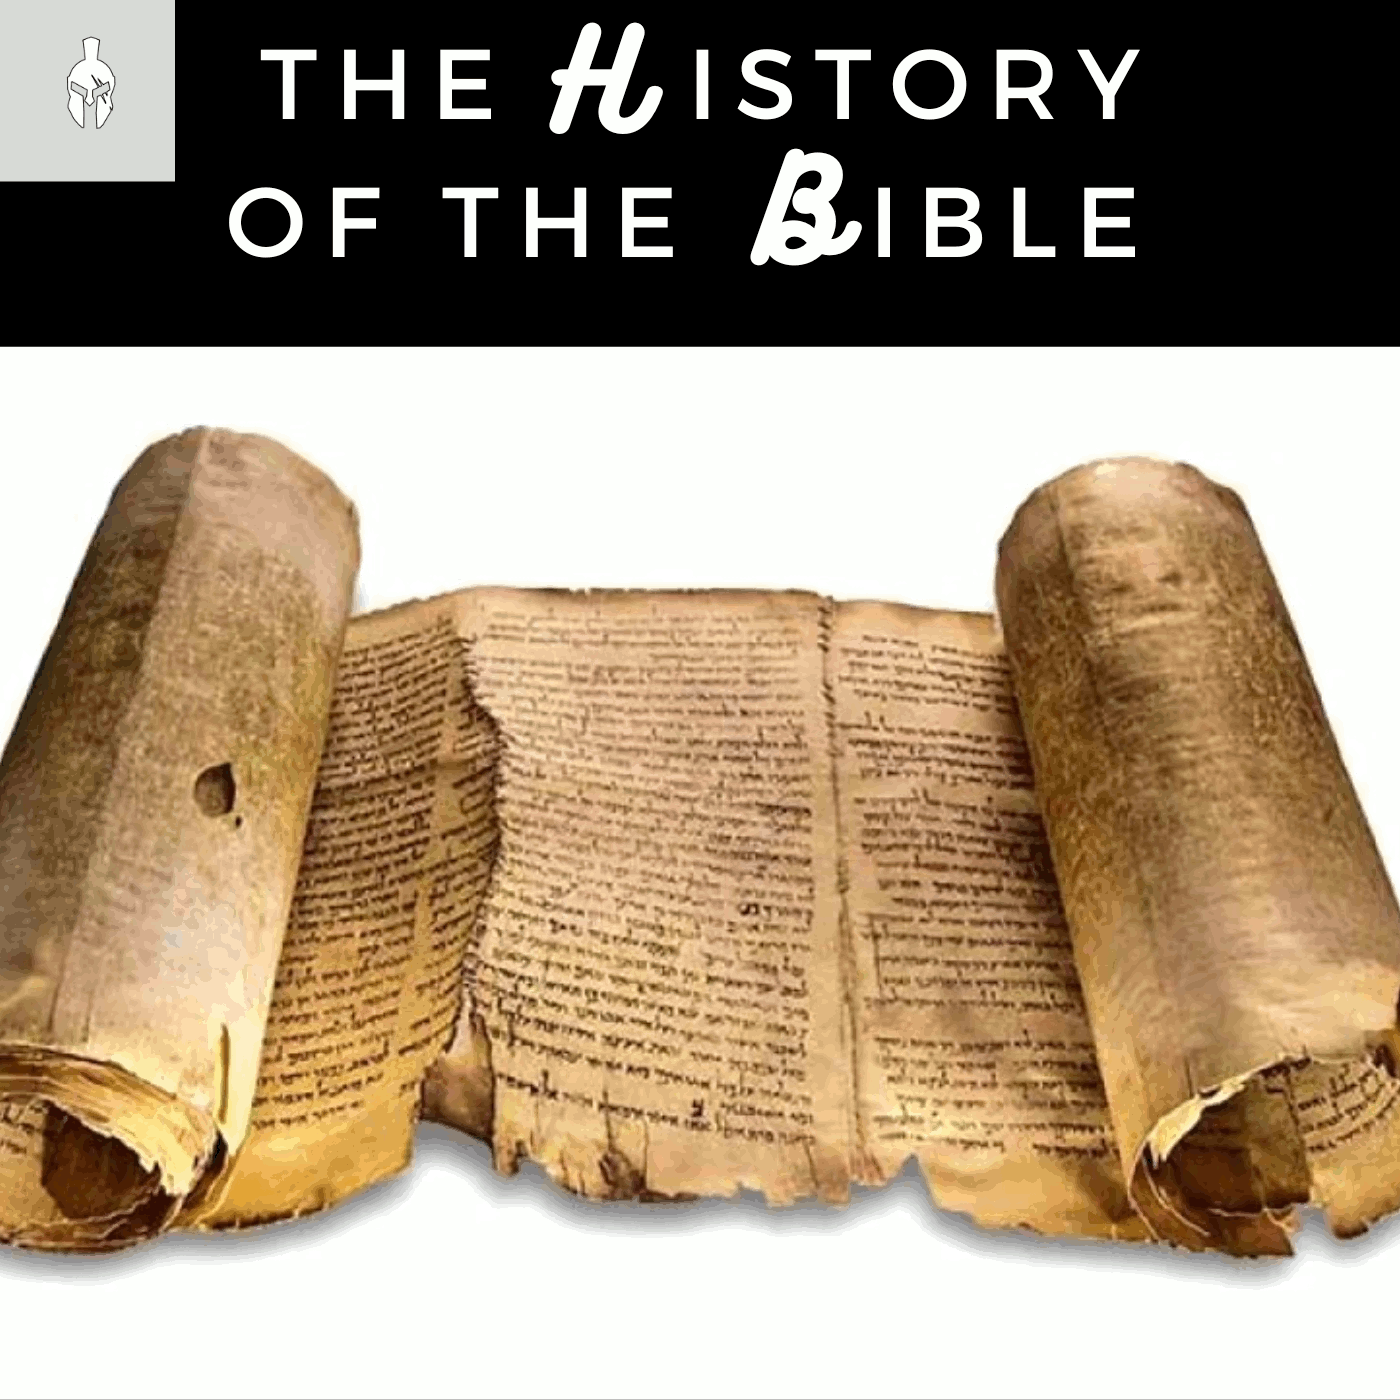 Intro to The History of the Bible!